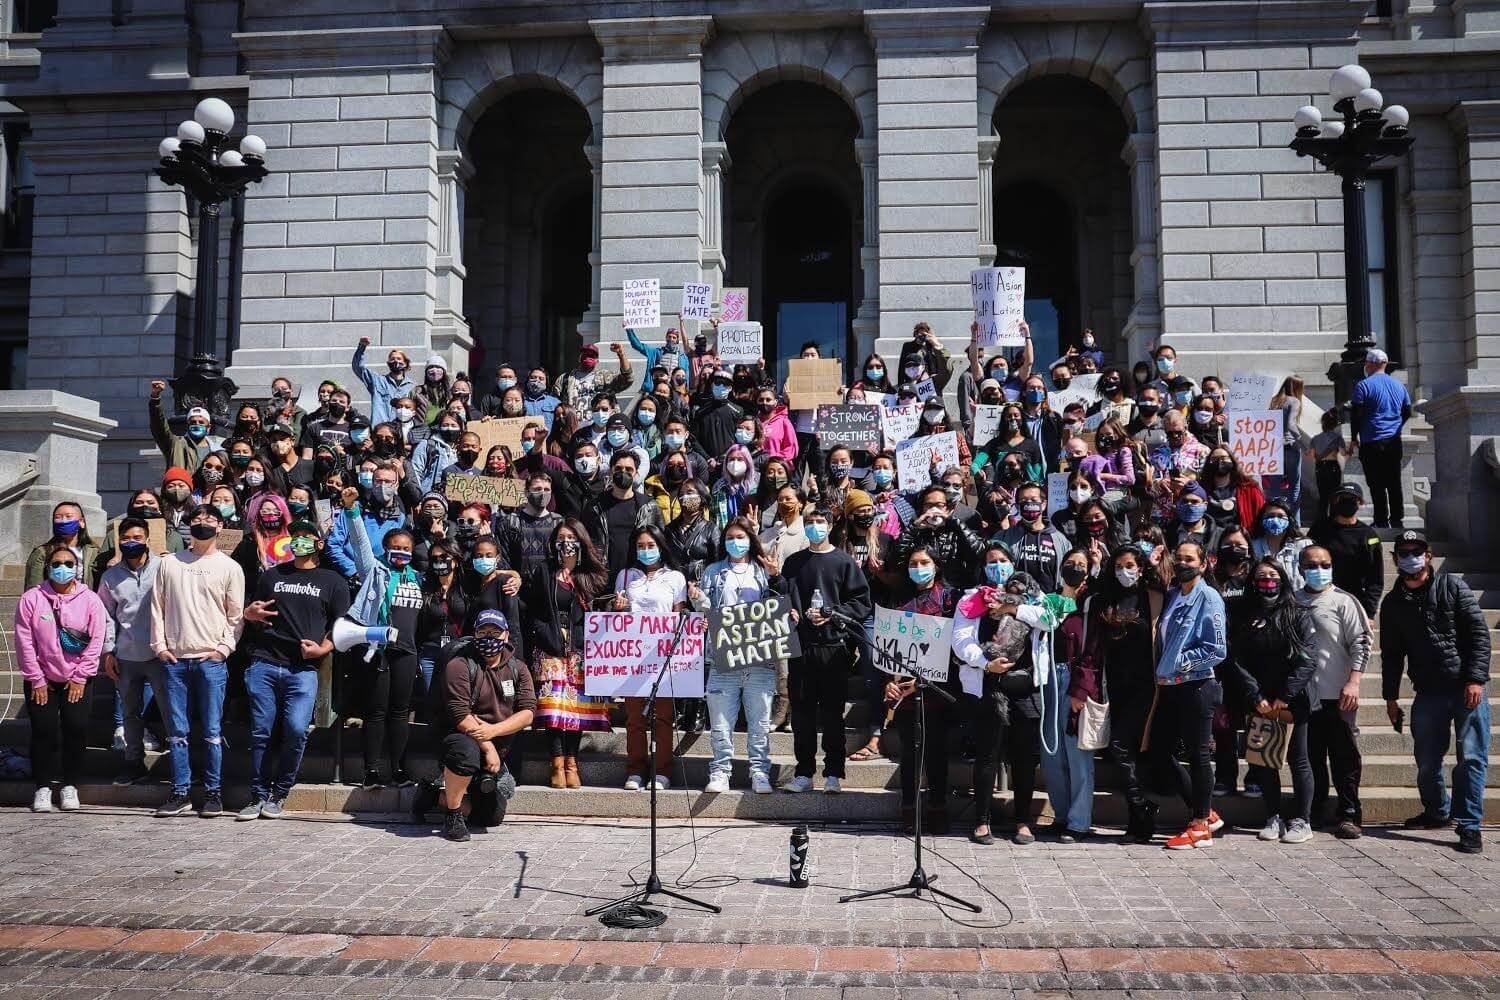 People gathered in front of the Colorado state capitol advocating for an end to racism and violence against Asian Americans and Pacific Islanders